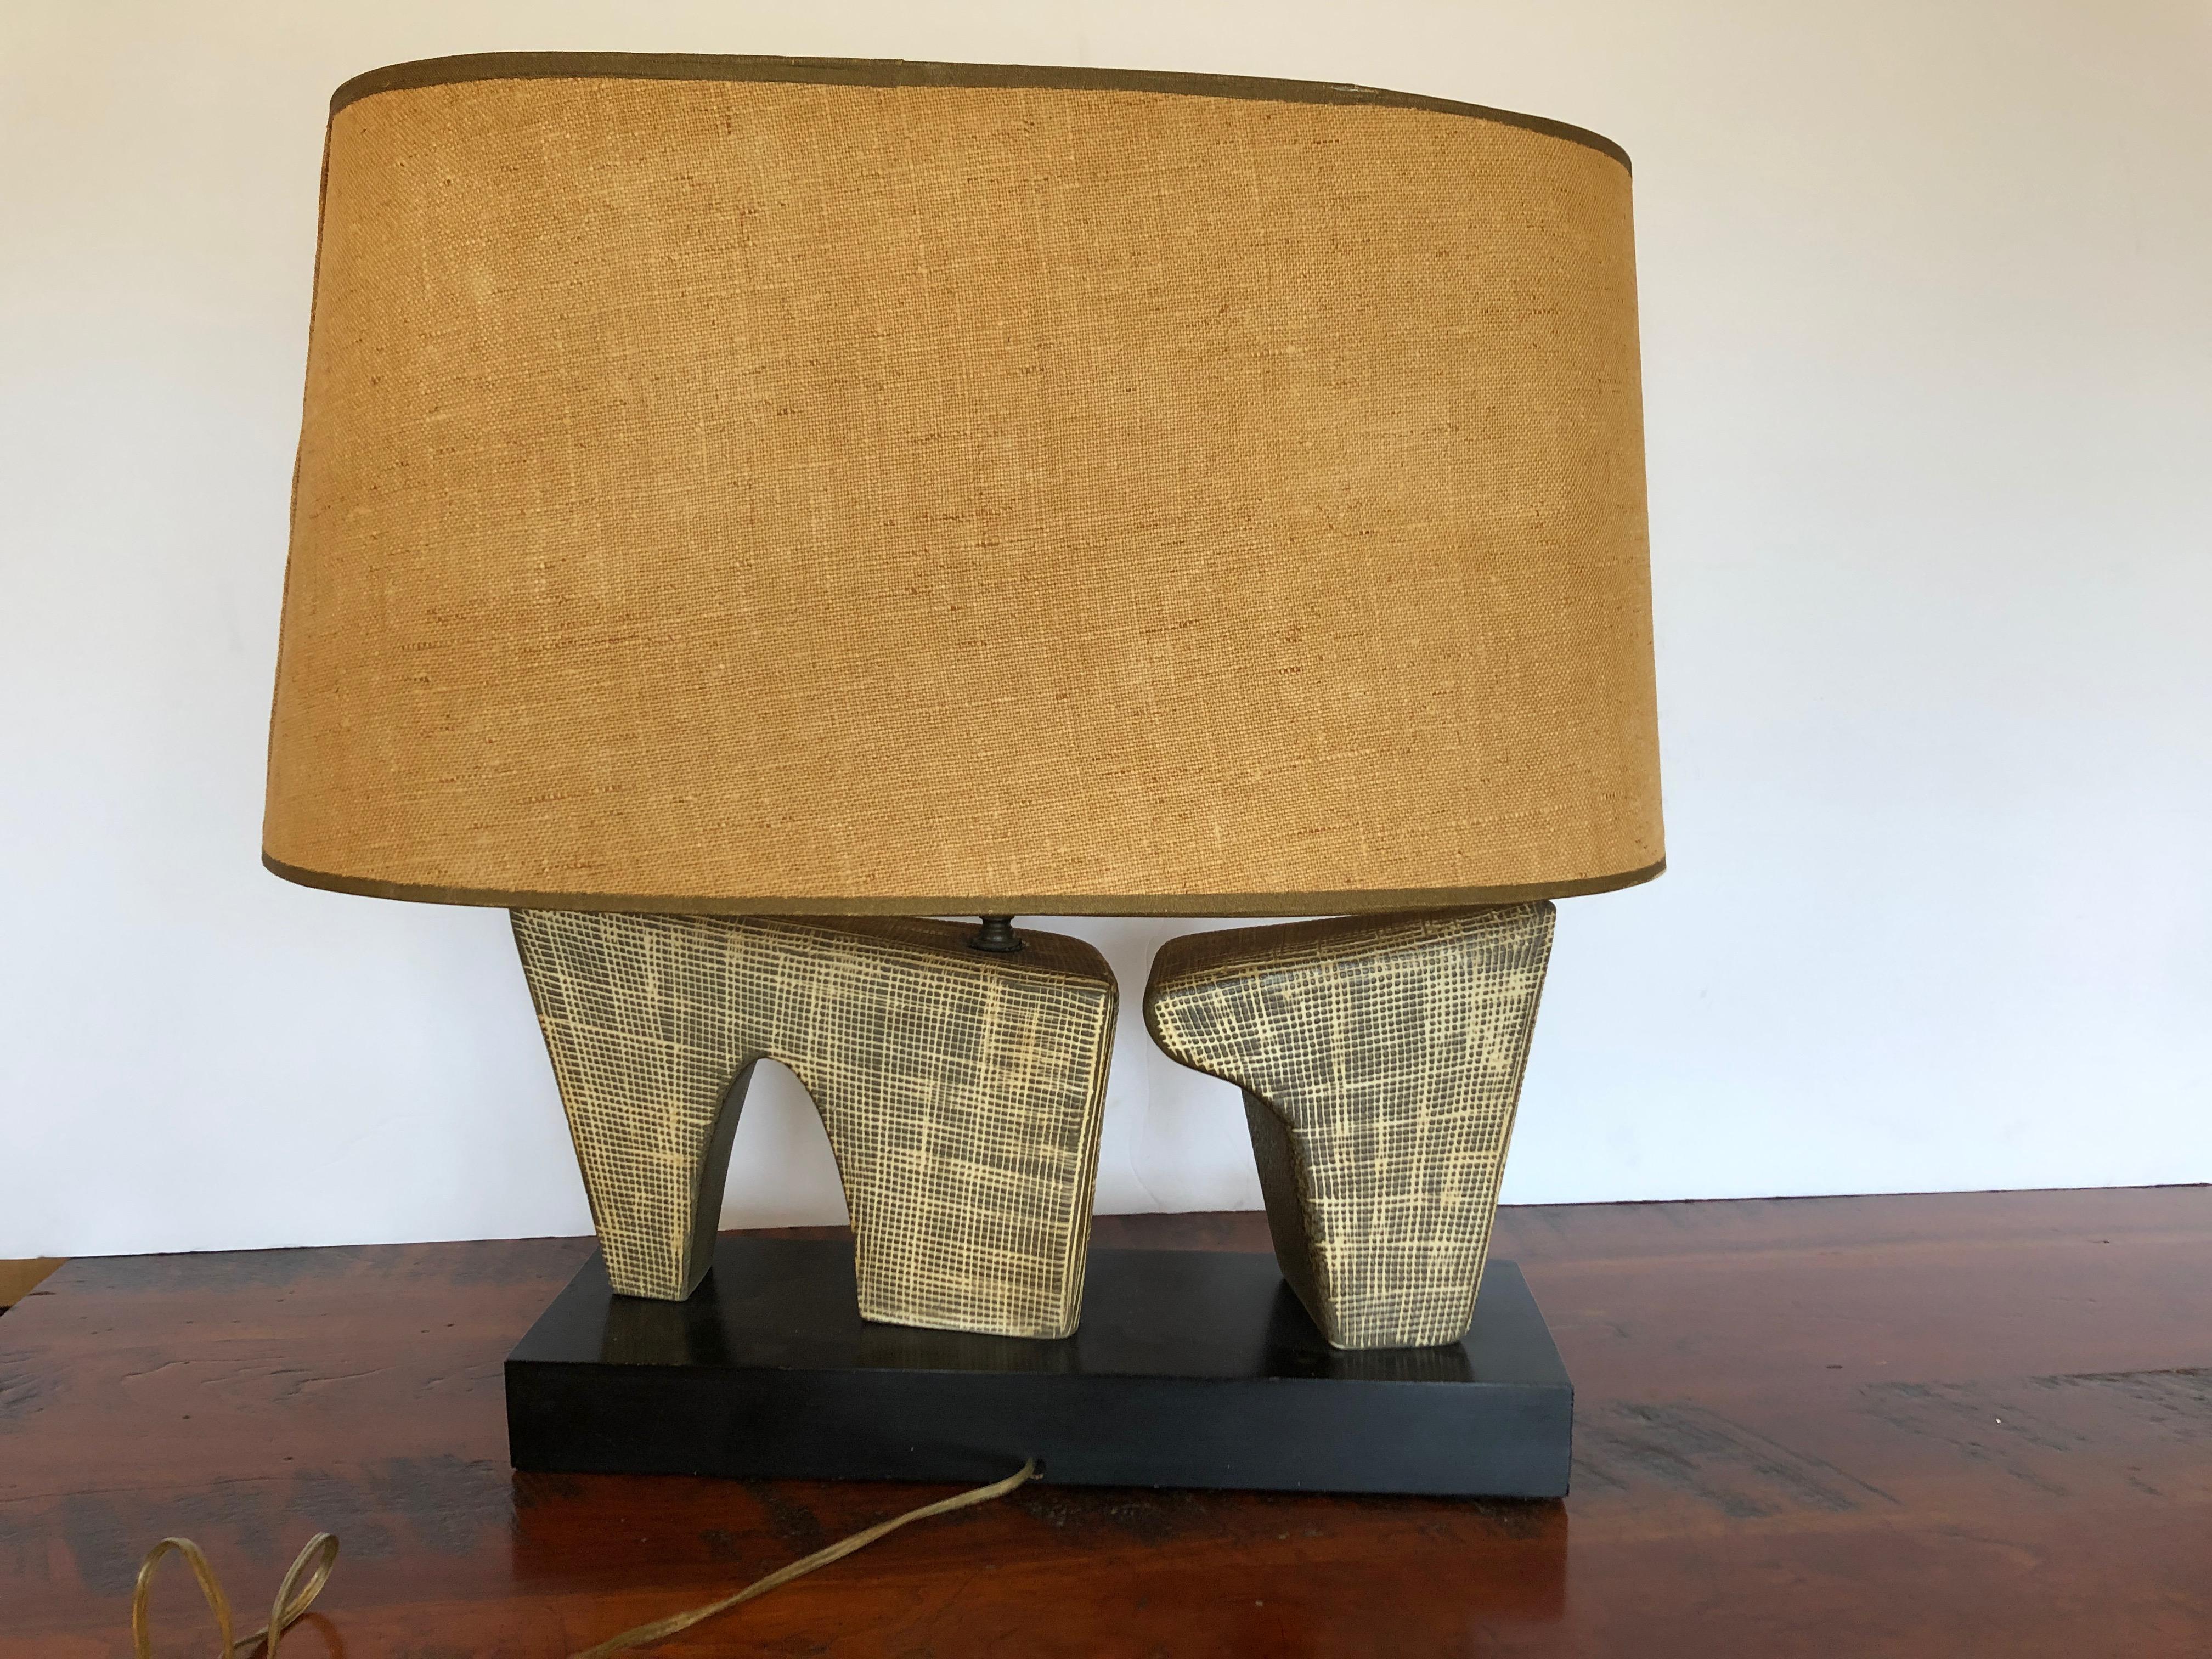 Super Stylish Mid-Century Modern Pottery Lamp with Oval Linen Shade 1